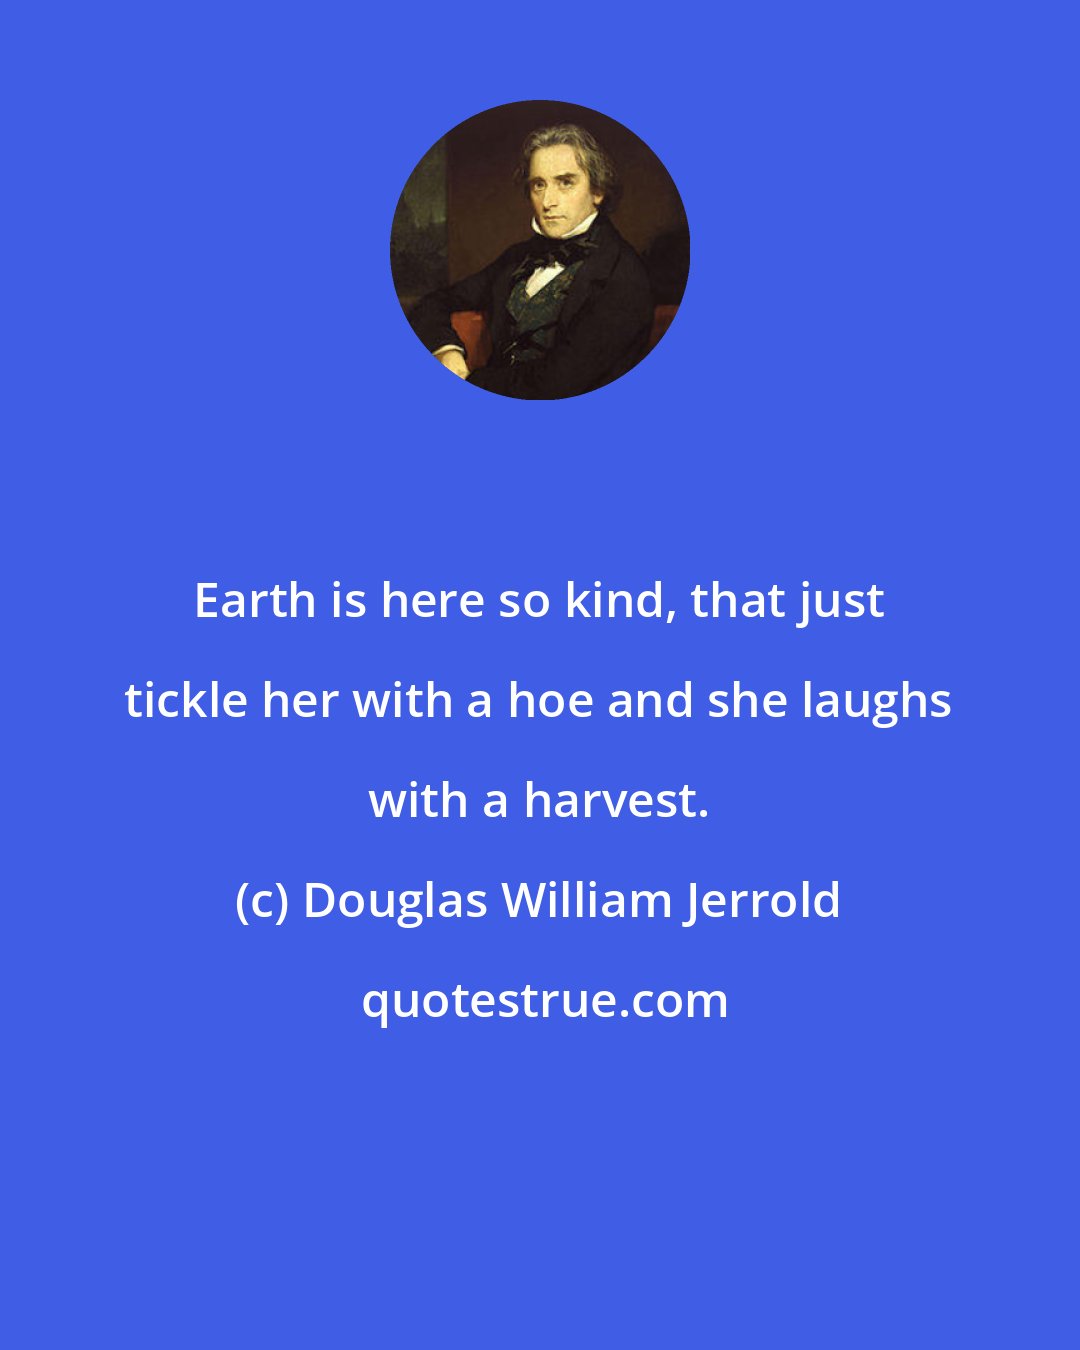 Douglas William Jerrold: Earth is here so kind, that just tickle her with a hoe and she laughs with a harvest.